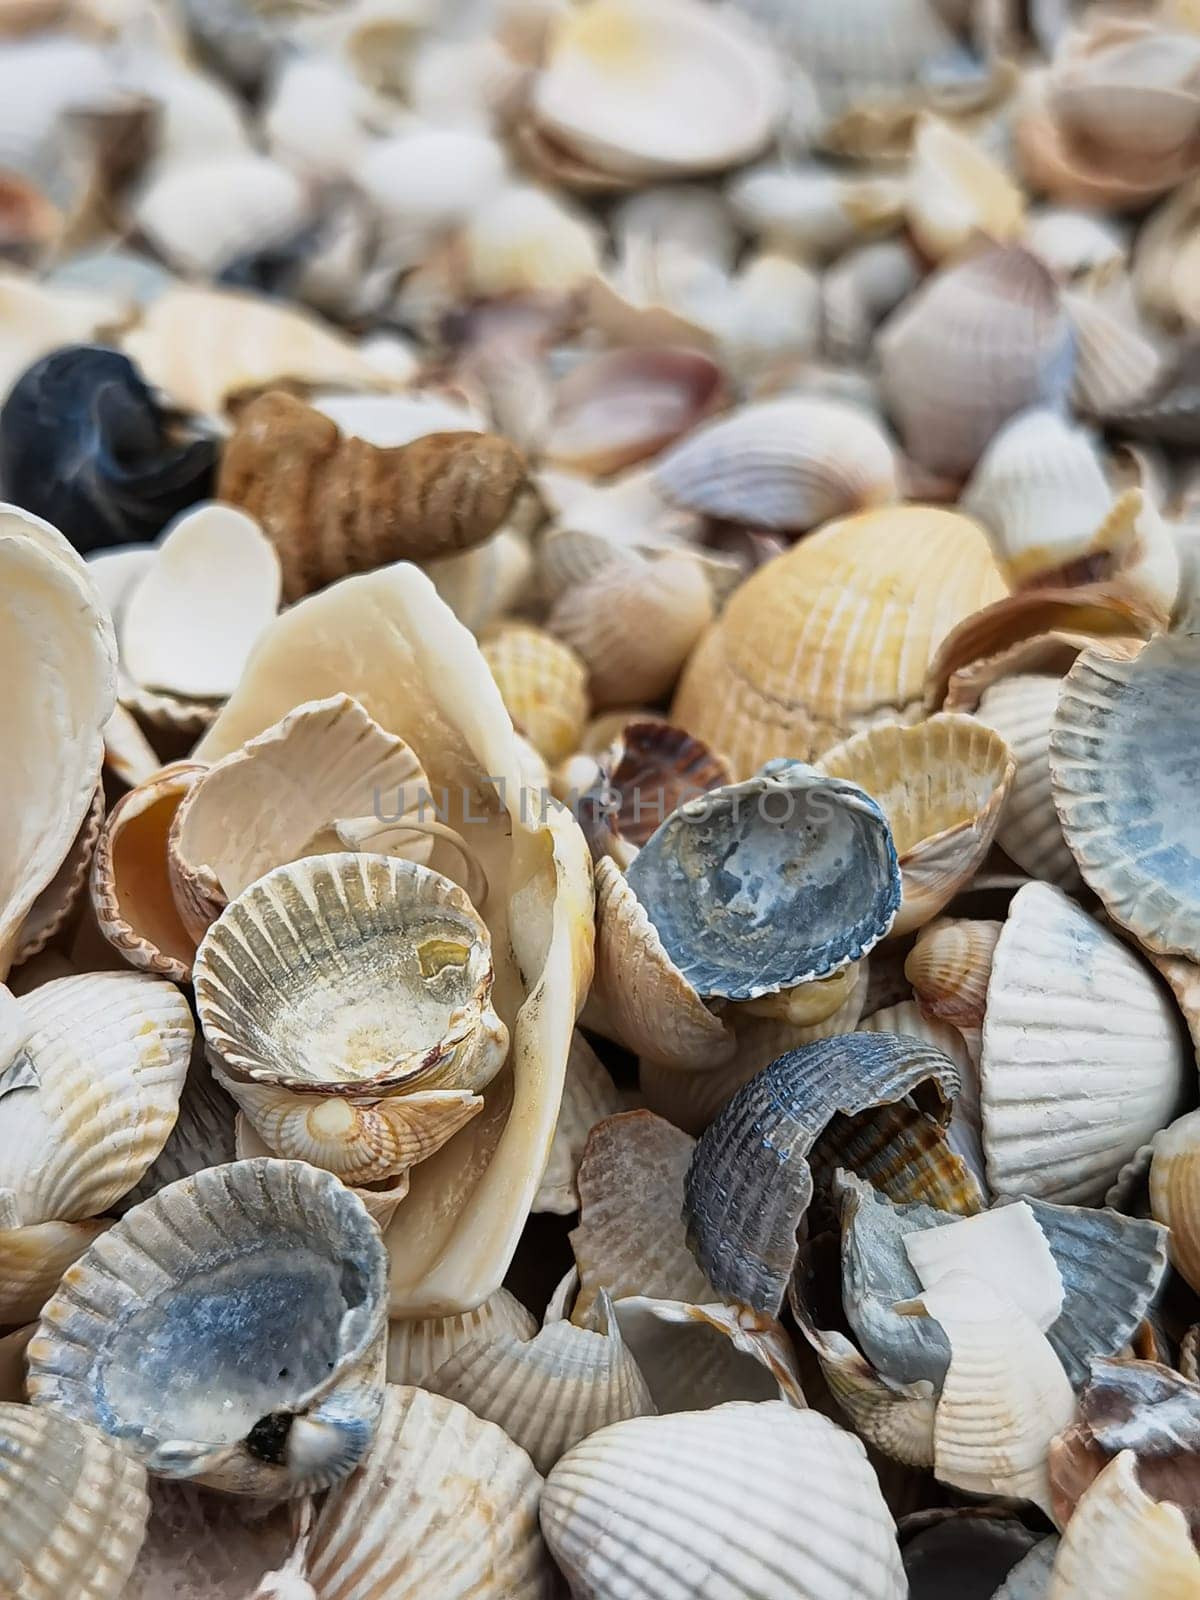 Natural Shell background, texture. Many seashells top view. Shallow dof.